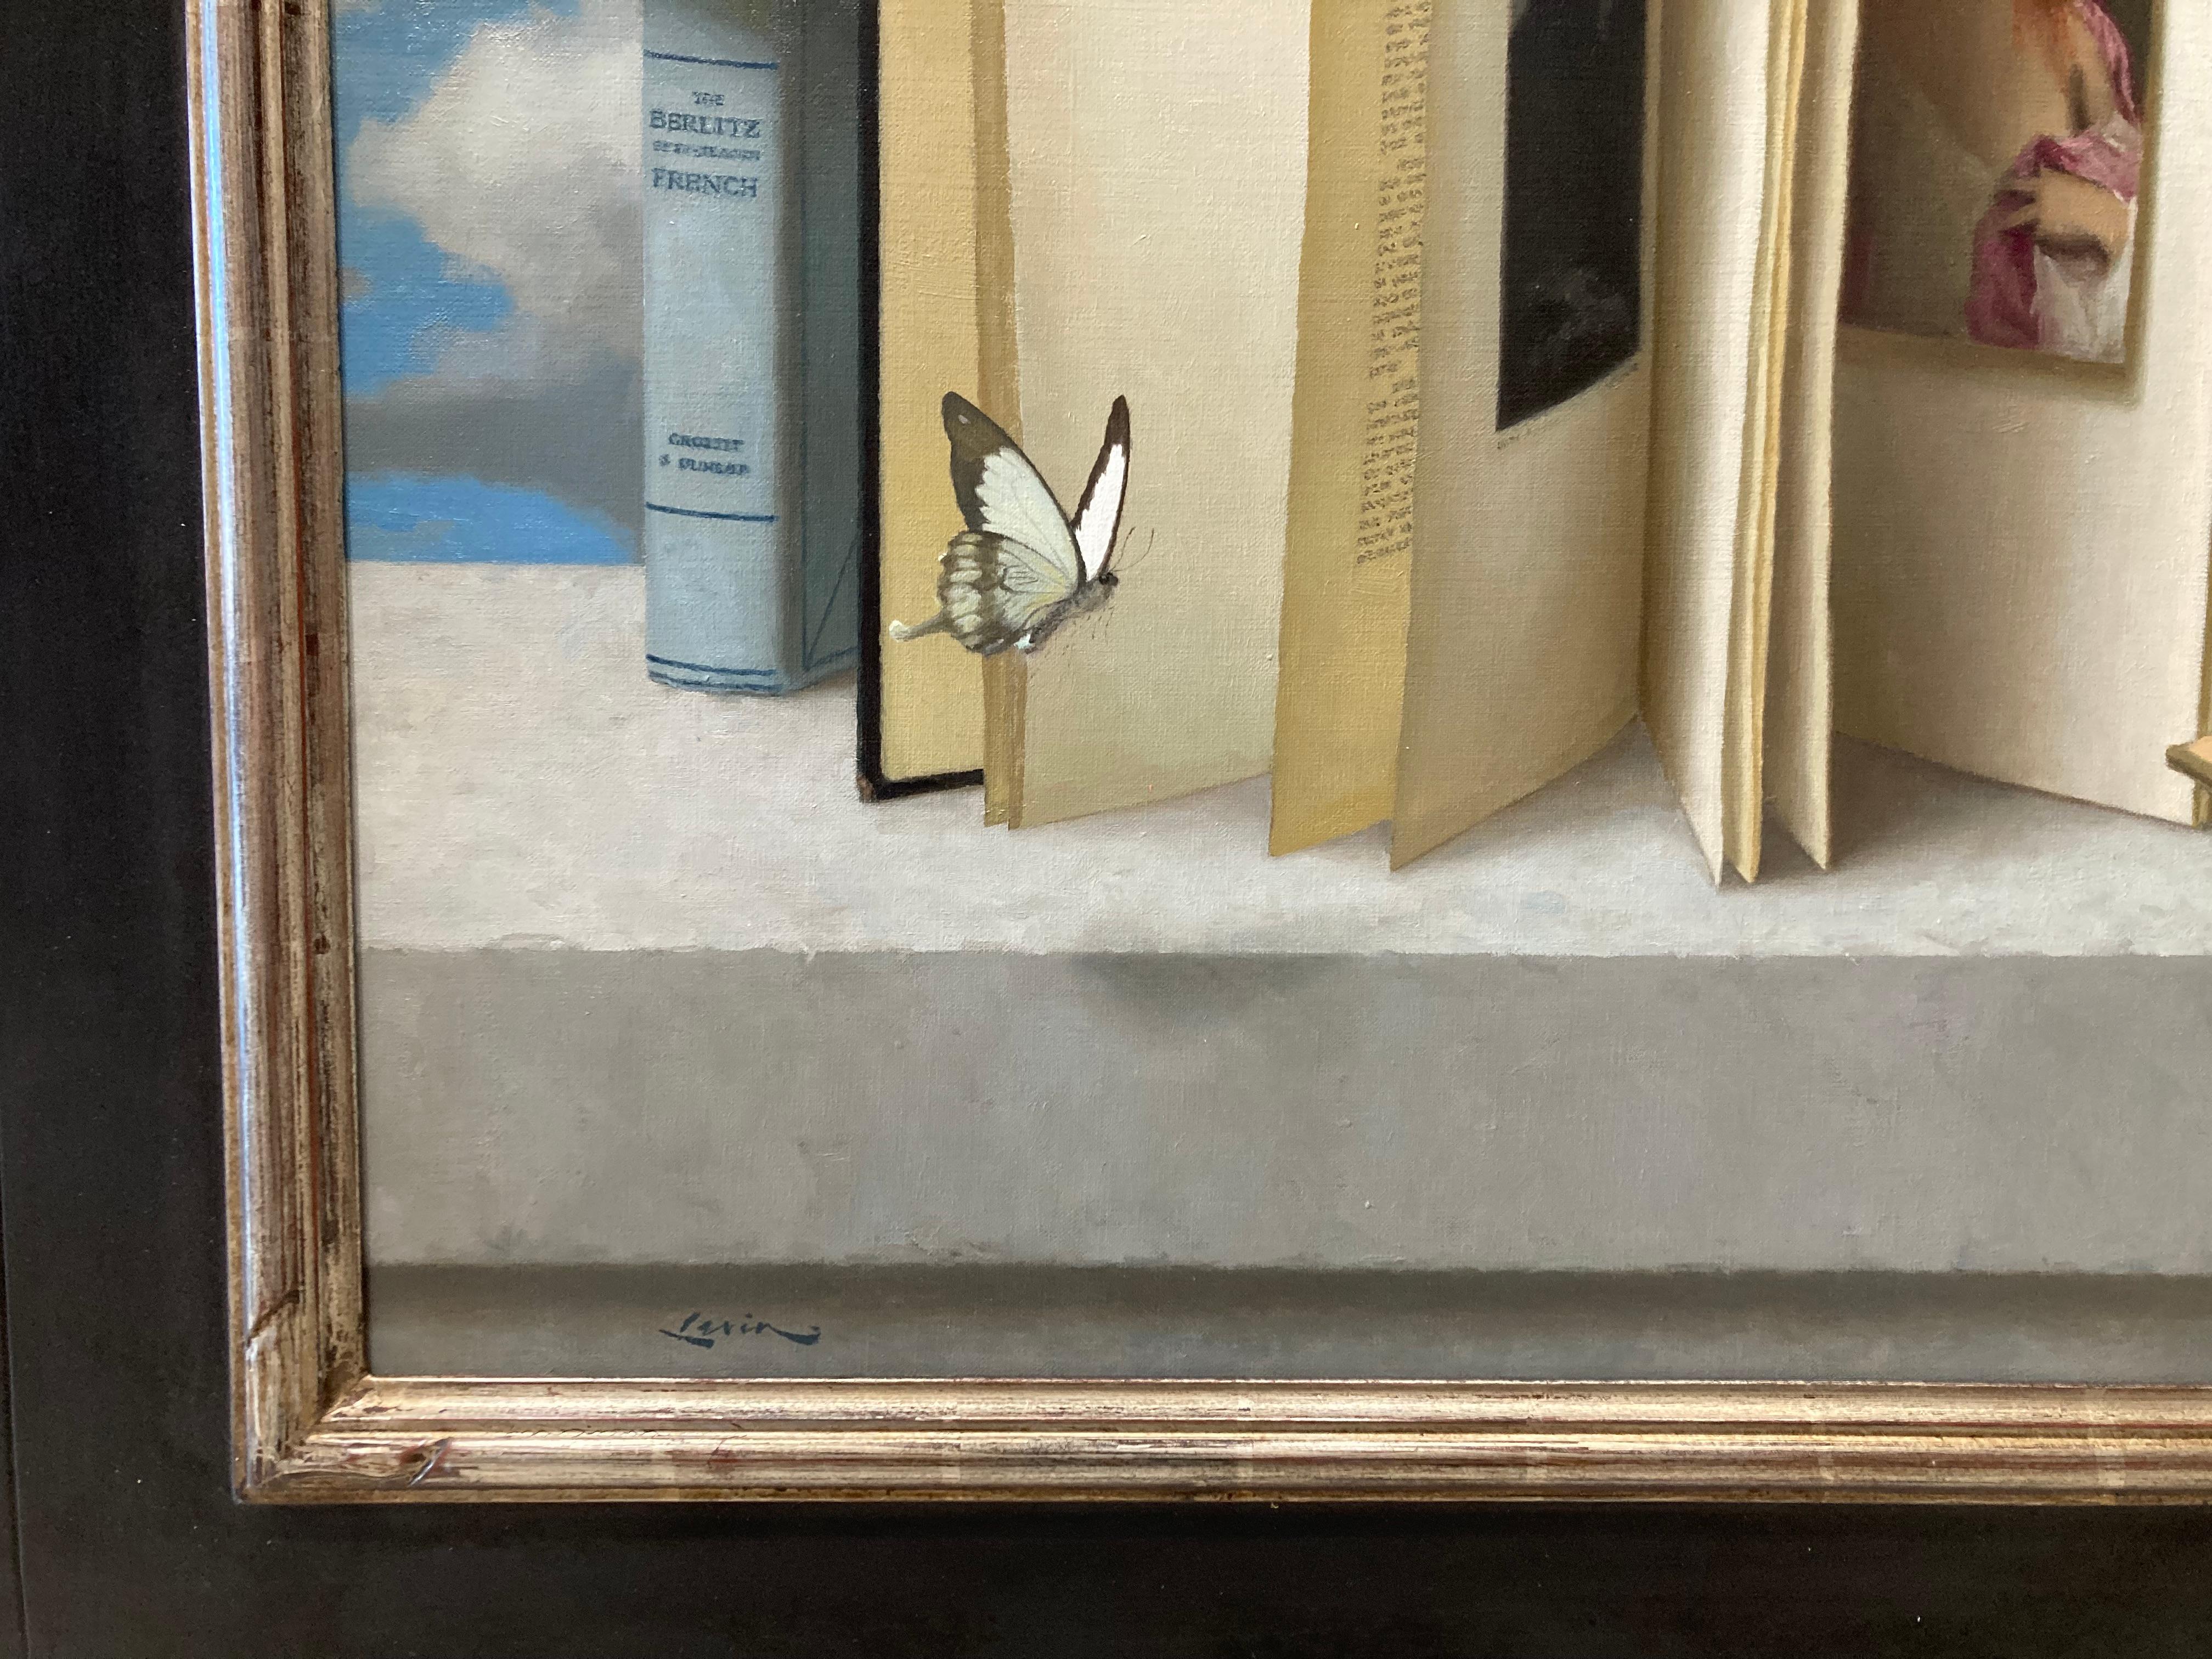 Floating Books and Butterflies - 2023 Surrealist still life and skyscape 6